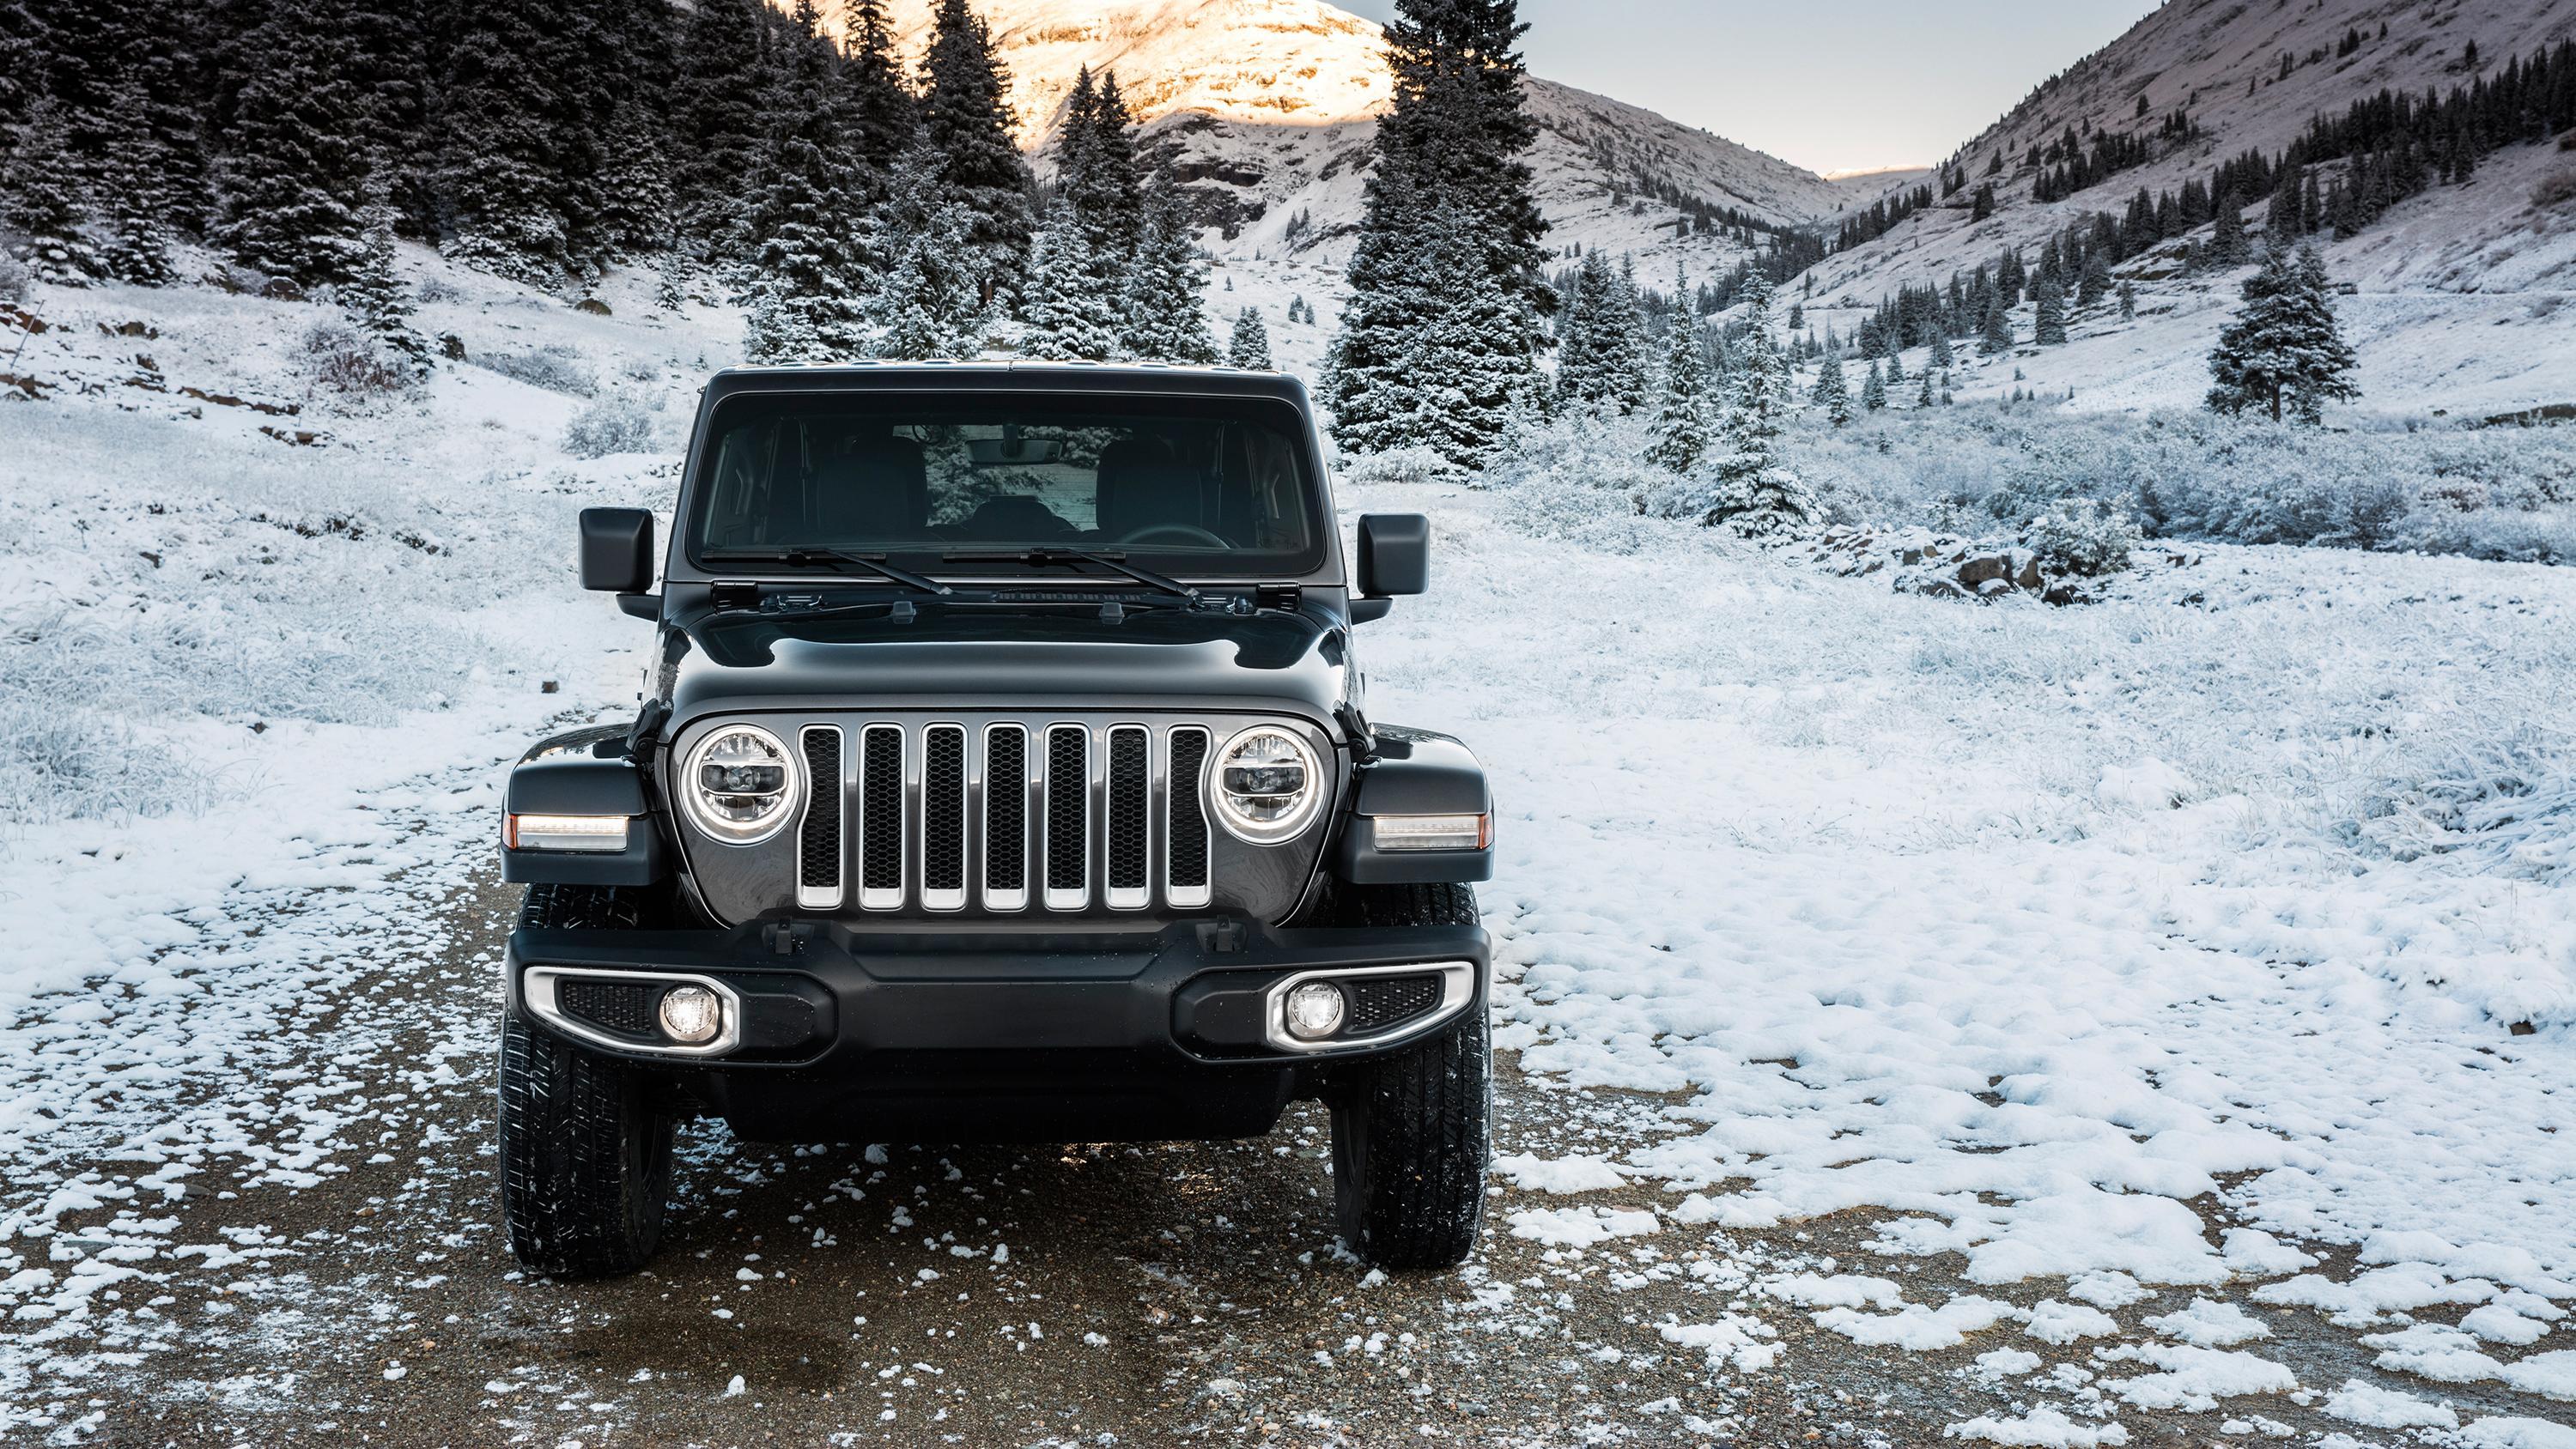 Jeep Wrangler Wallpaper and Background Image